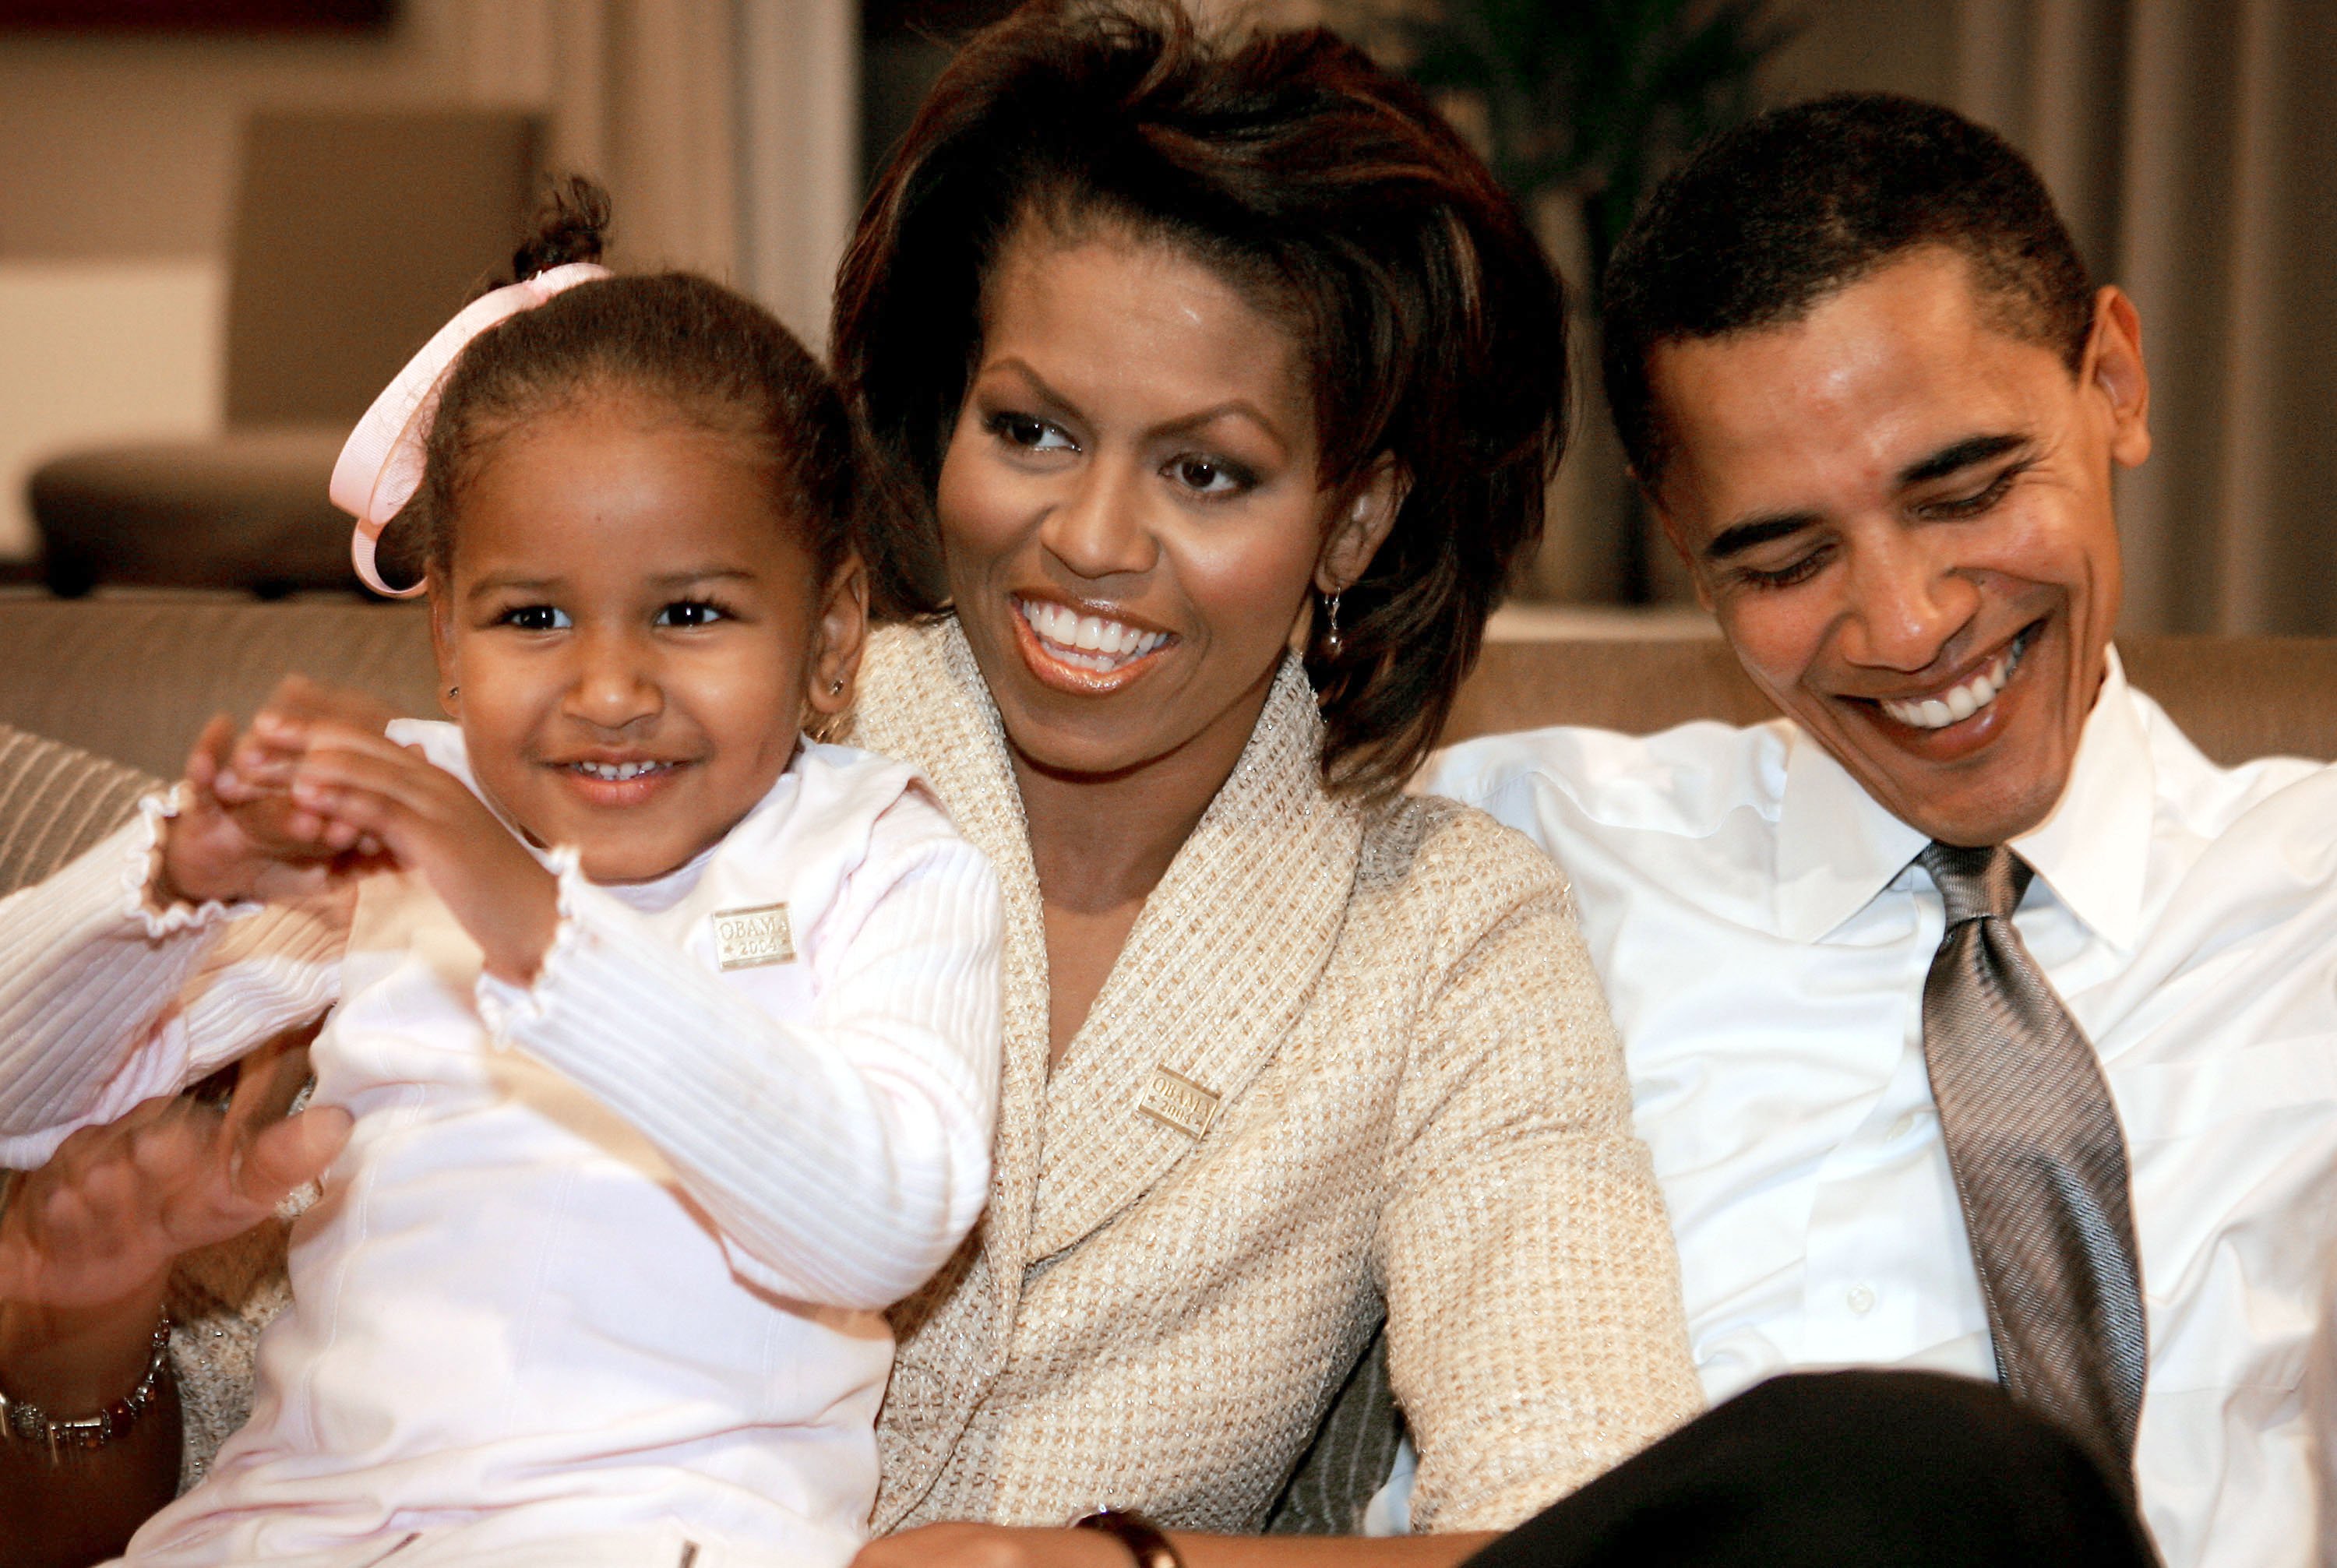 Candidate for the U.S. Senate Barack Obama (D-IL) sits with his wife Michelle and daughters Sasha (L) in a hotel room as they wait for election returns to come in November 2, 2004, in Chicago, Illinois. | Source: Getty Images.